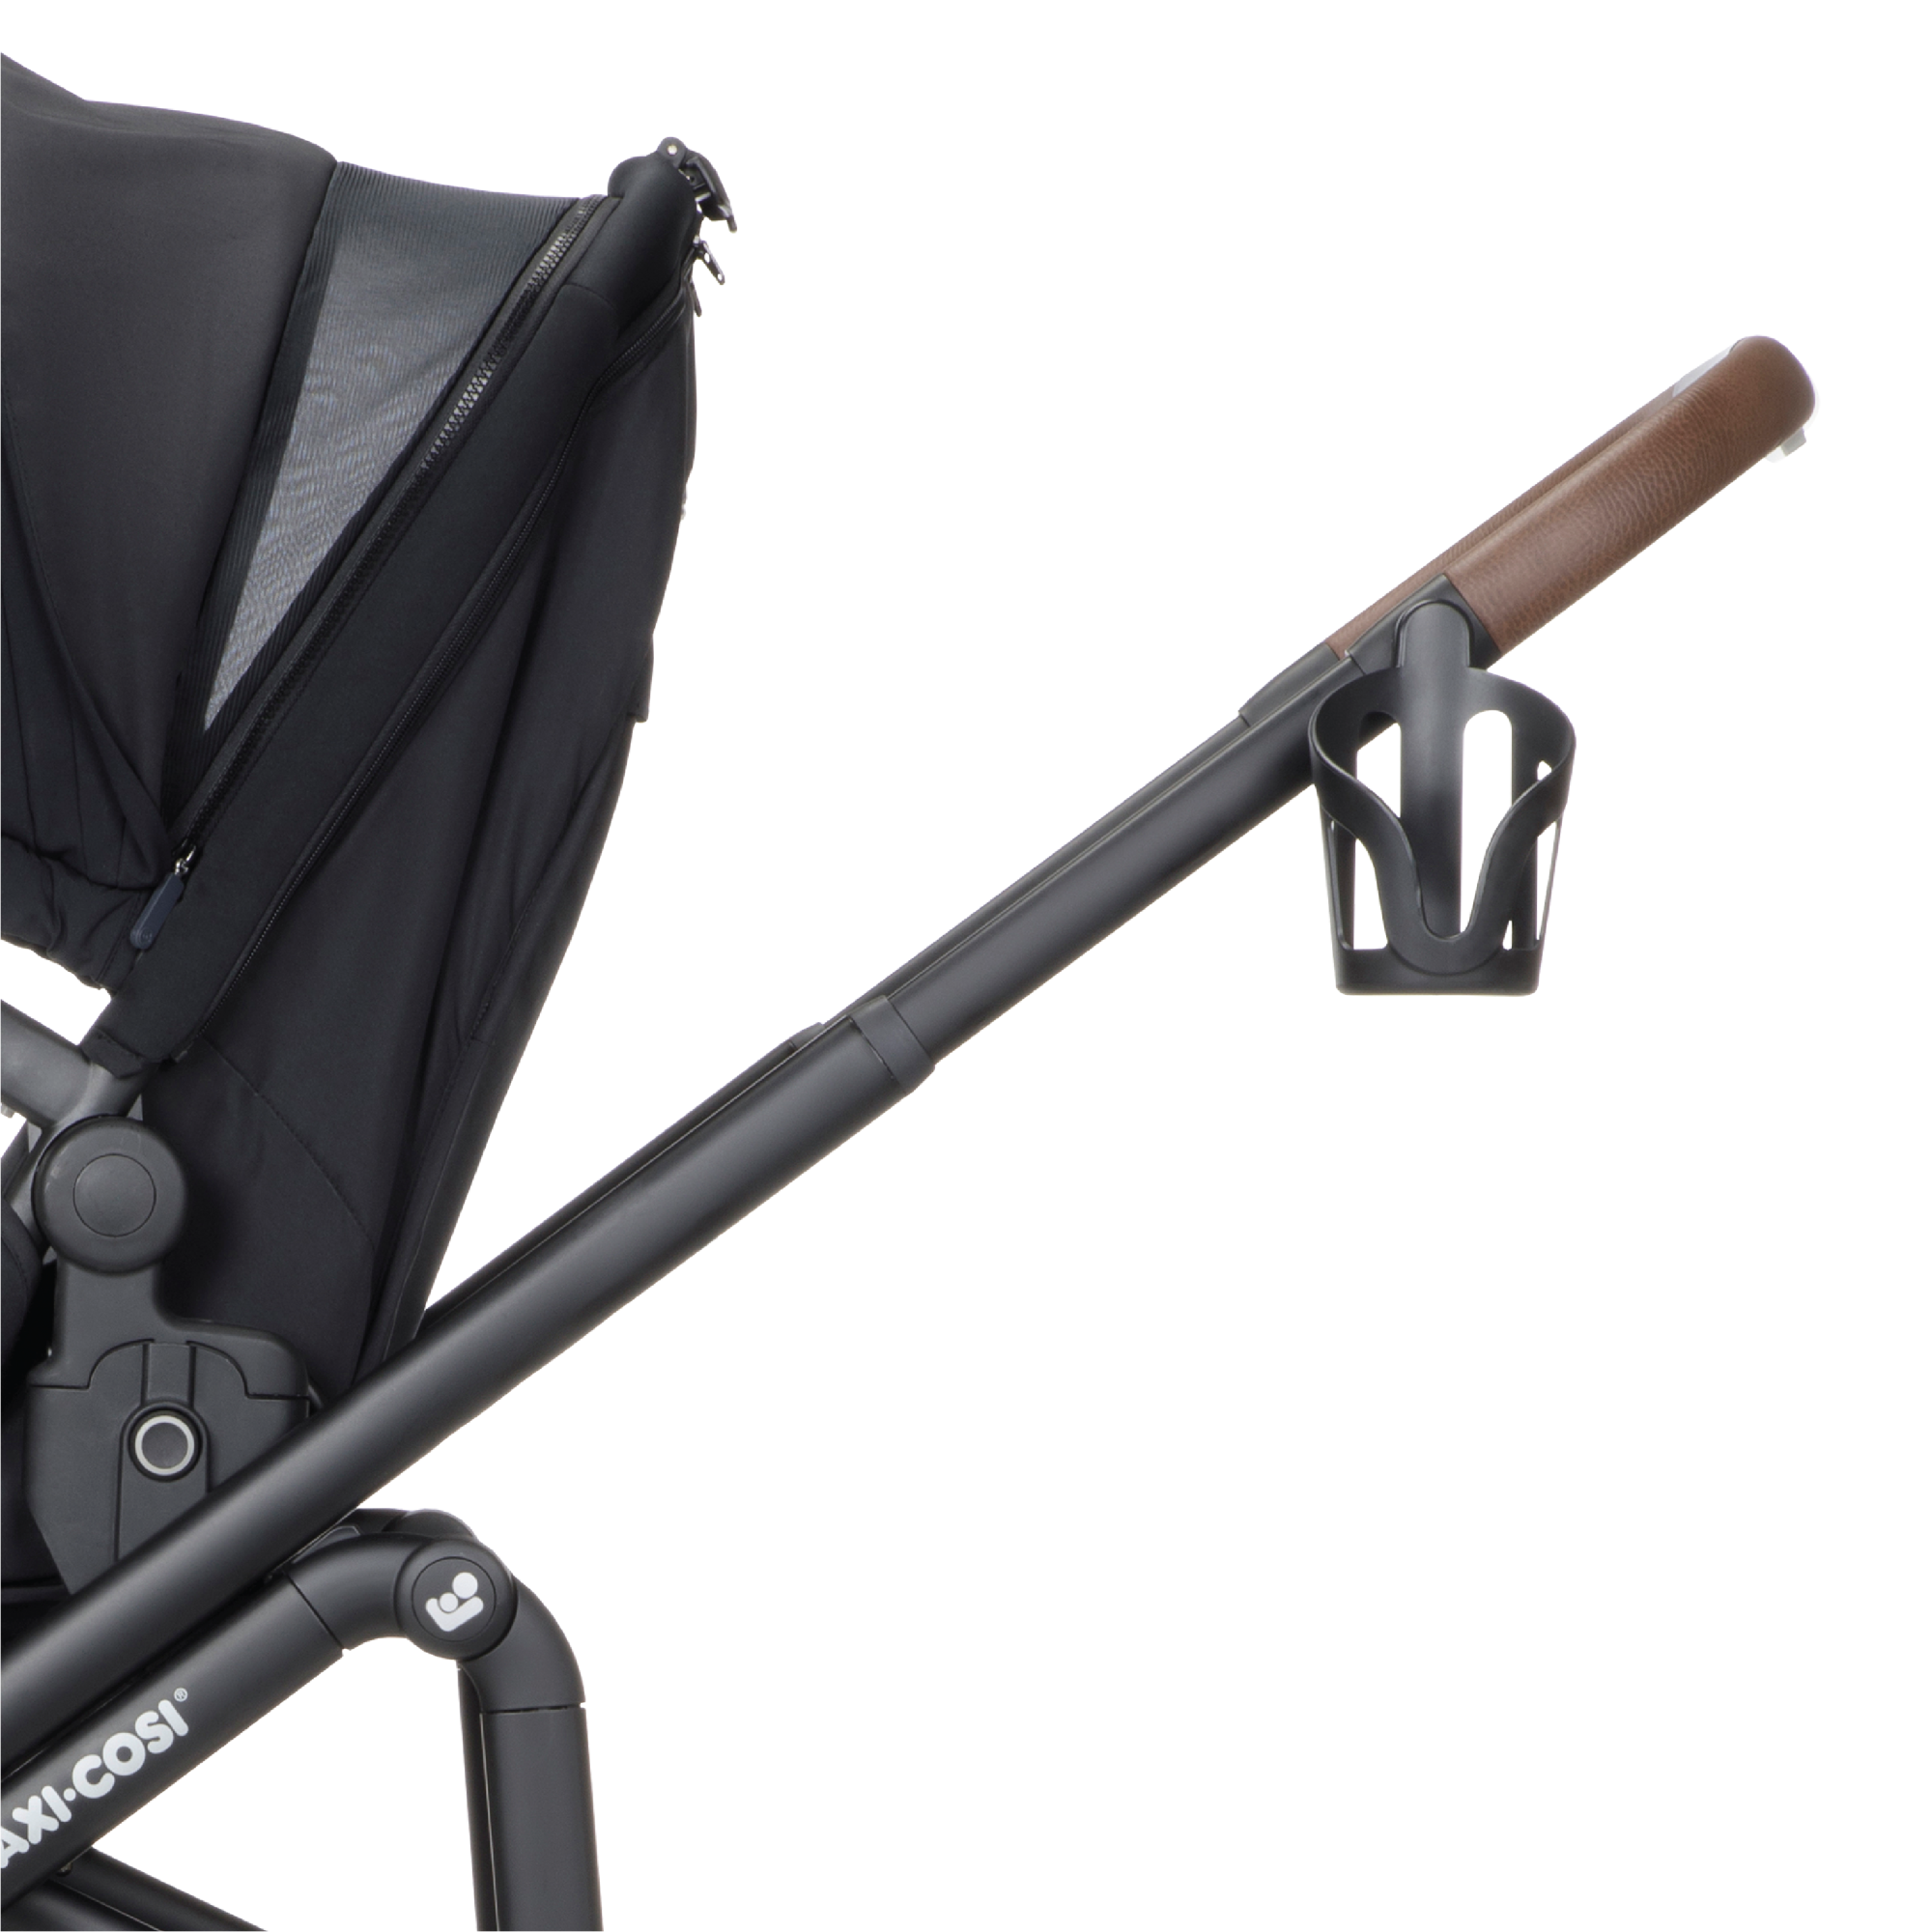 Tayla Max Modular Stroller - Onyx Wonder - parent cup holder and rain cover included